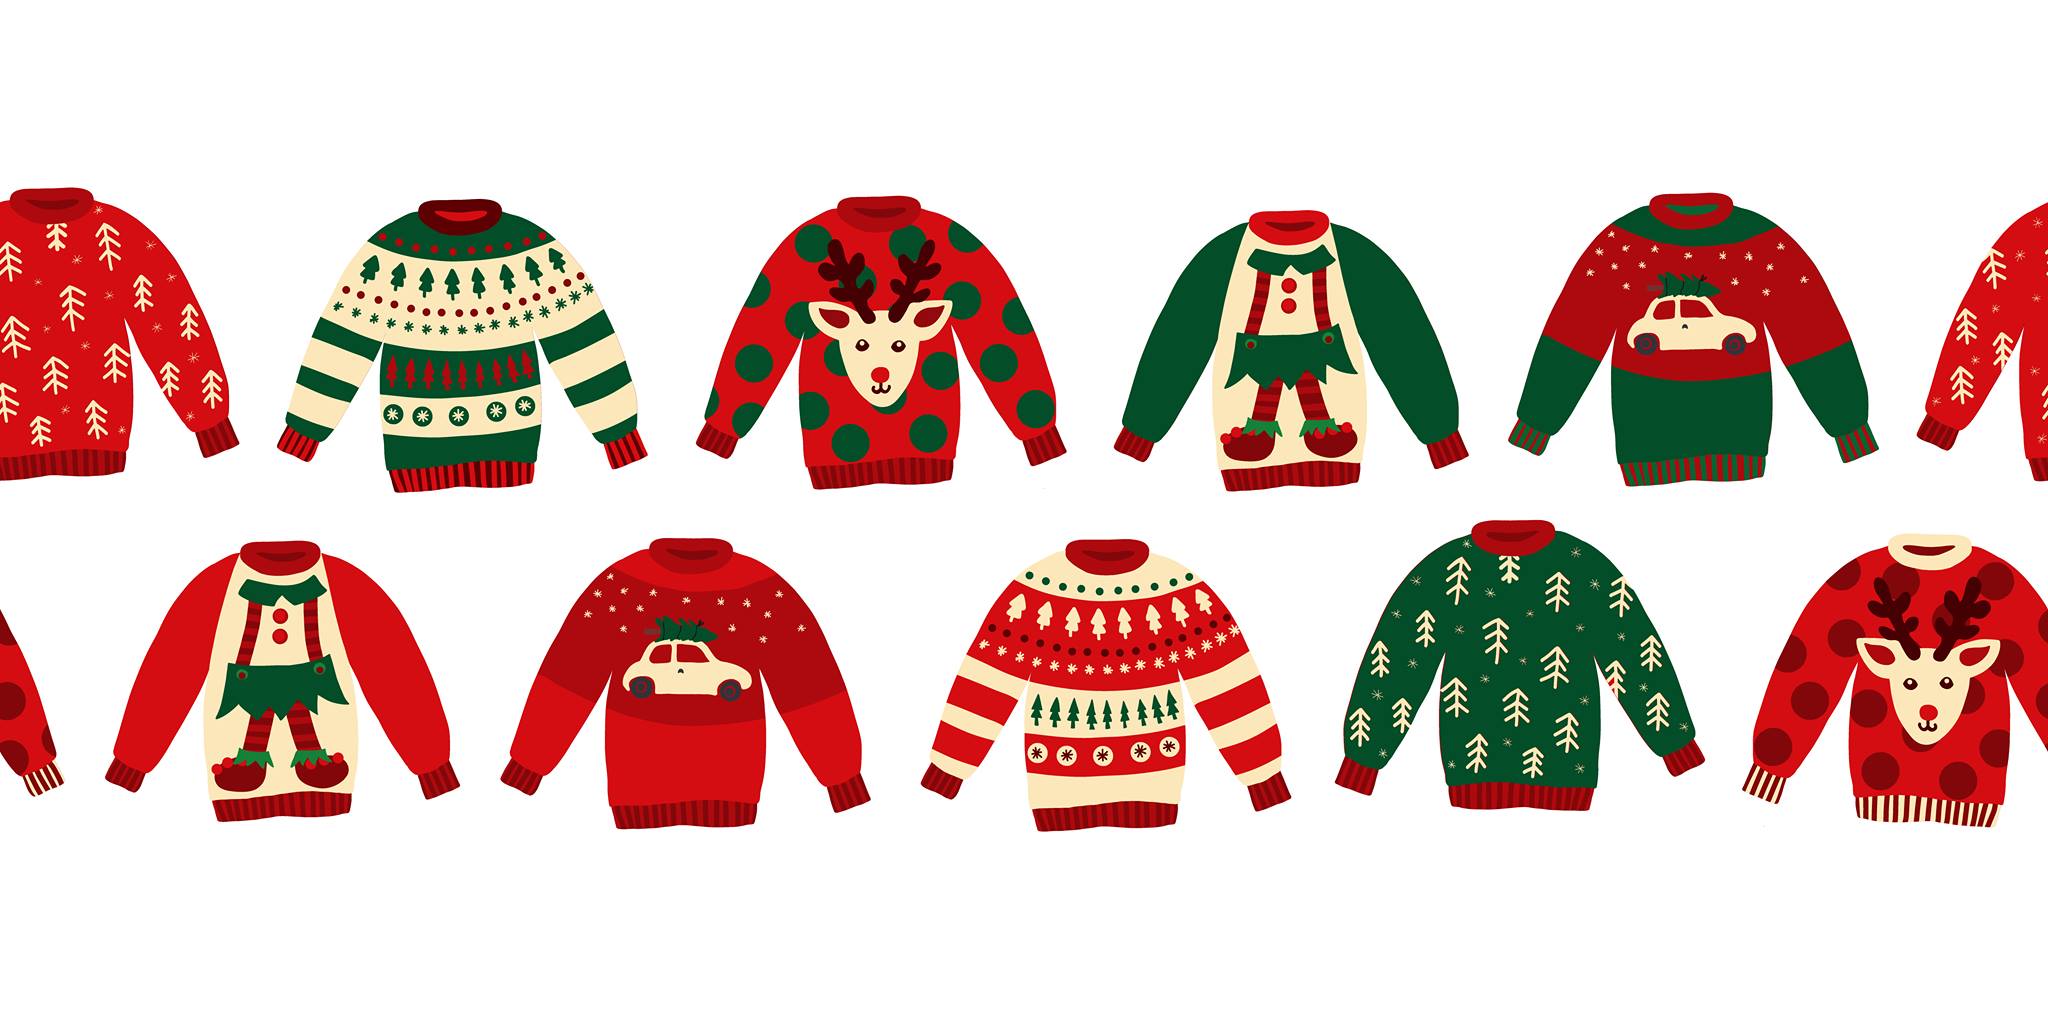 Ugly Sweater Party! Cover Photo